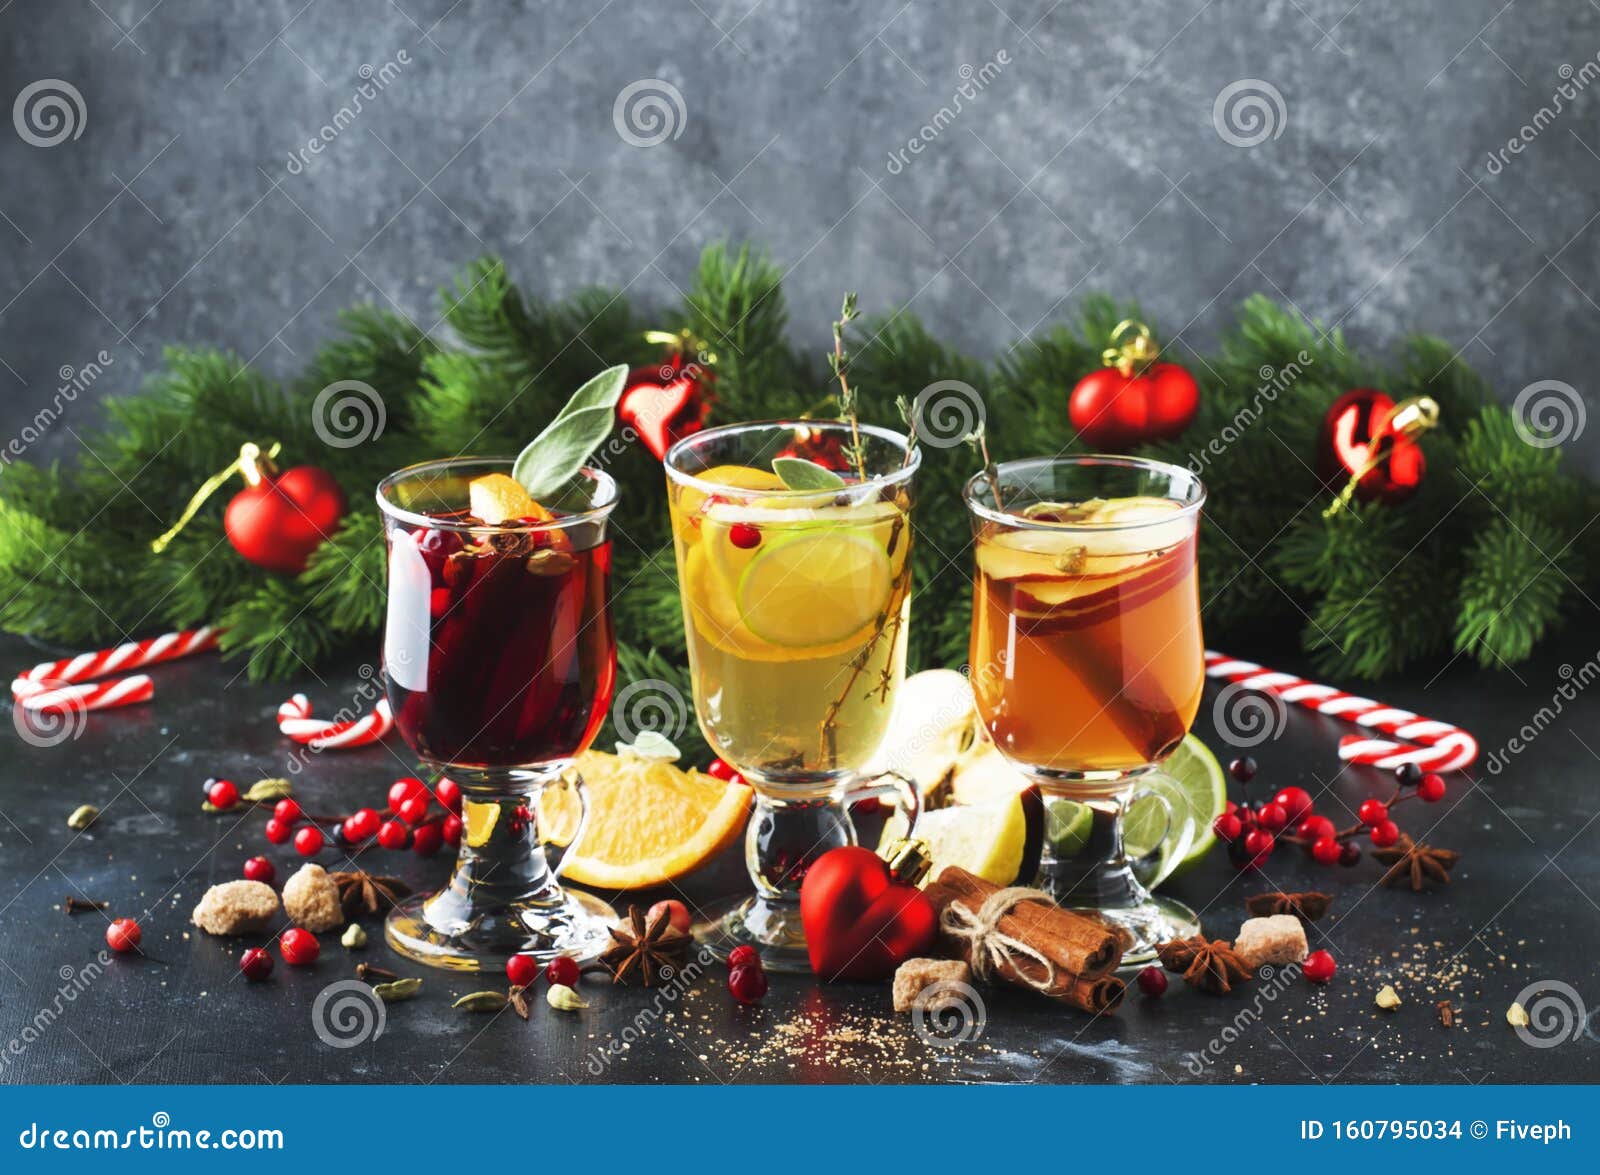 mulled wine and mulled cider. hot winter drinks and cocktails for christmas or new year`s eve in glass mugs with spices and citru